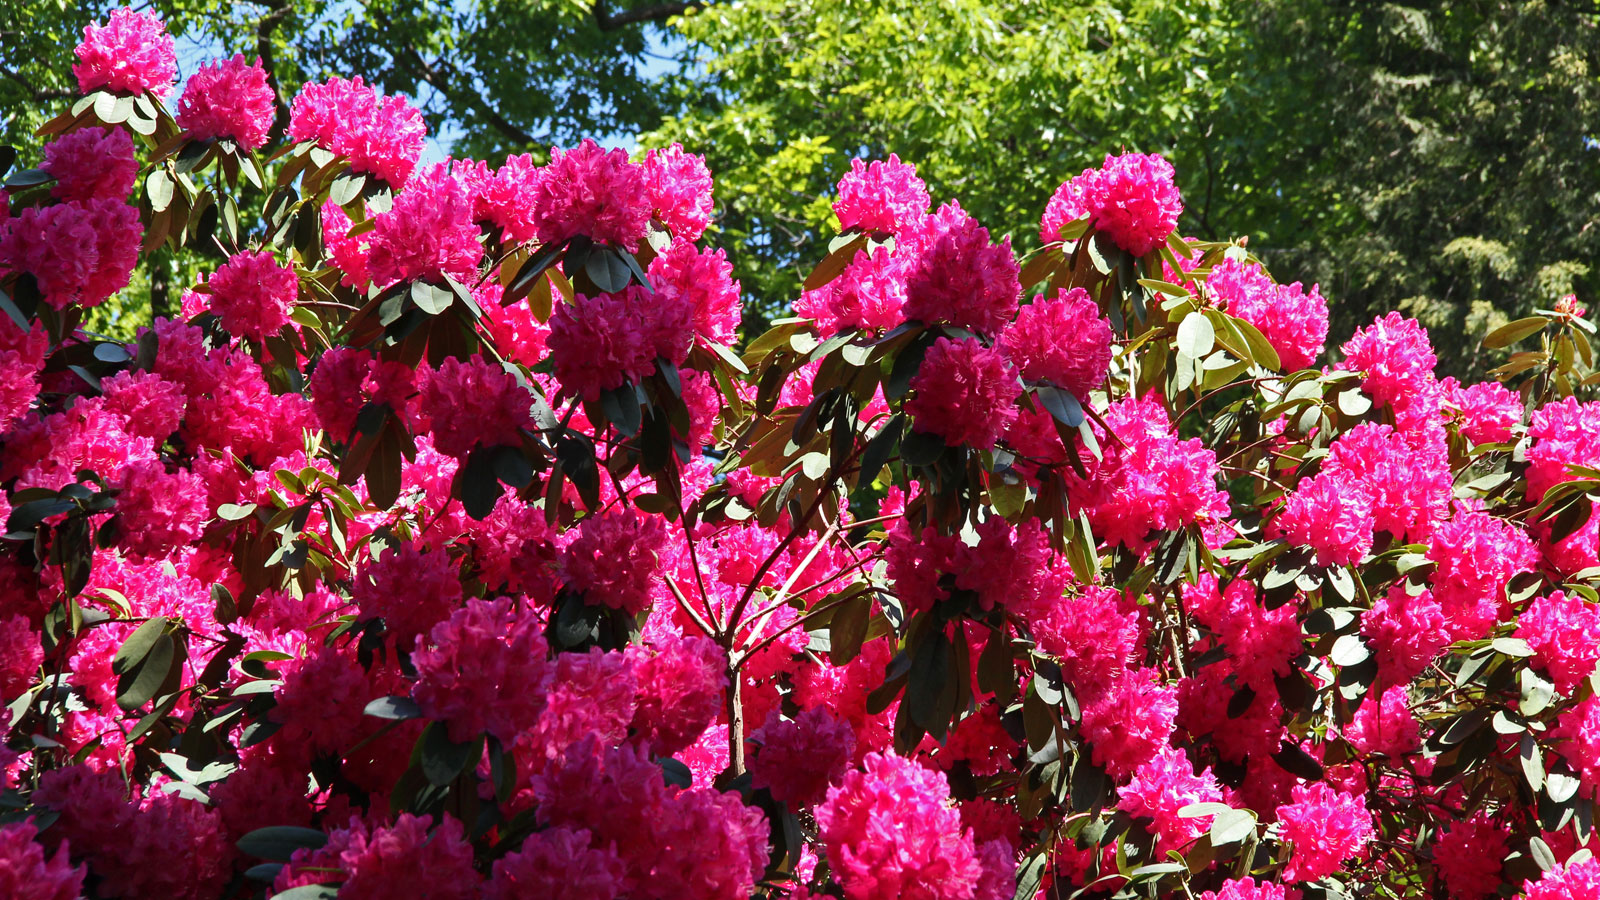 Rhododendron in Blüte